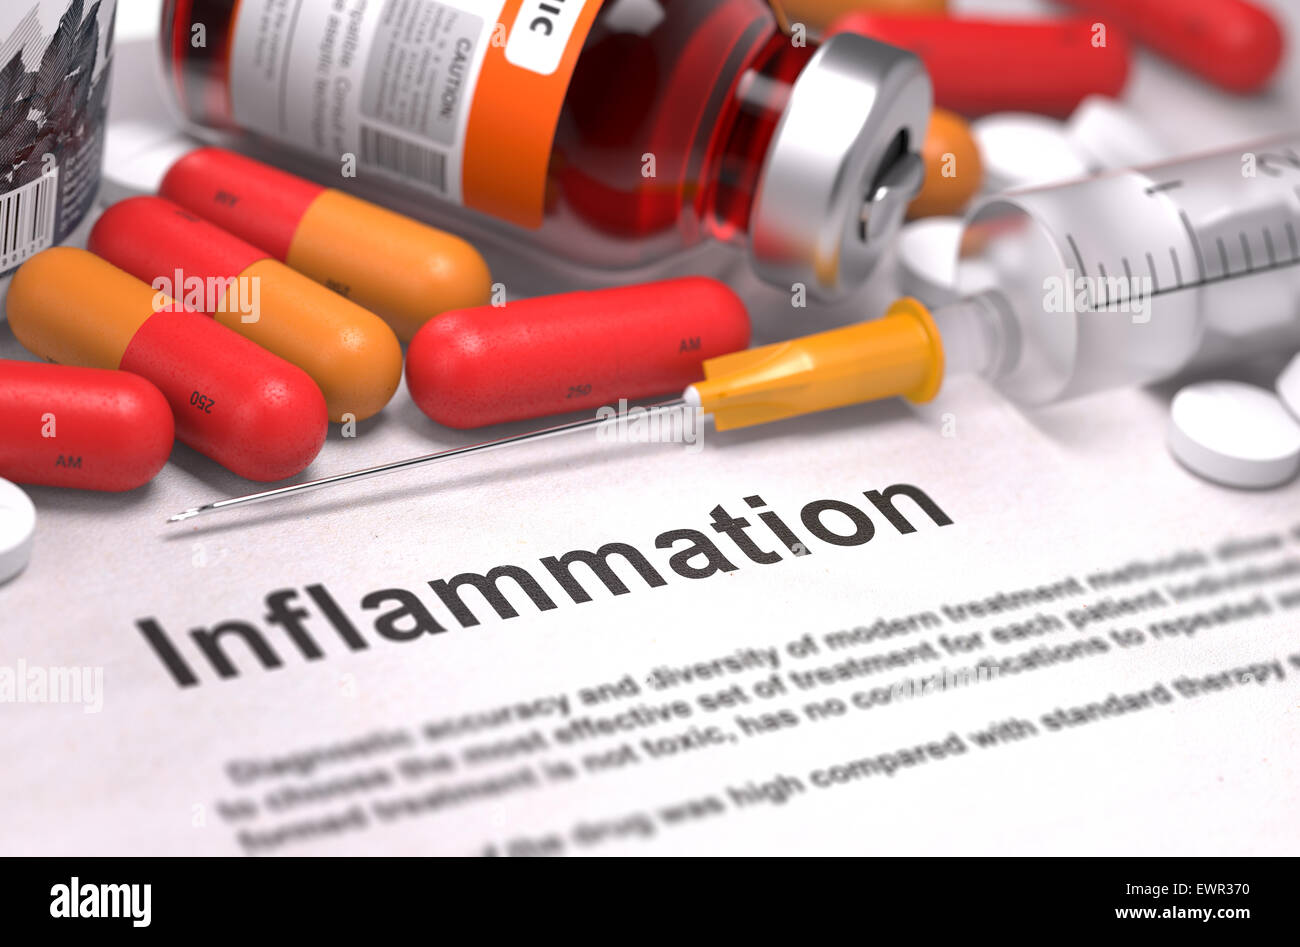 Inflammation - Medical Concept with Red Pills, Injections and Syringe. Selective Focus. Stock Photo